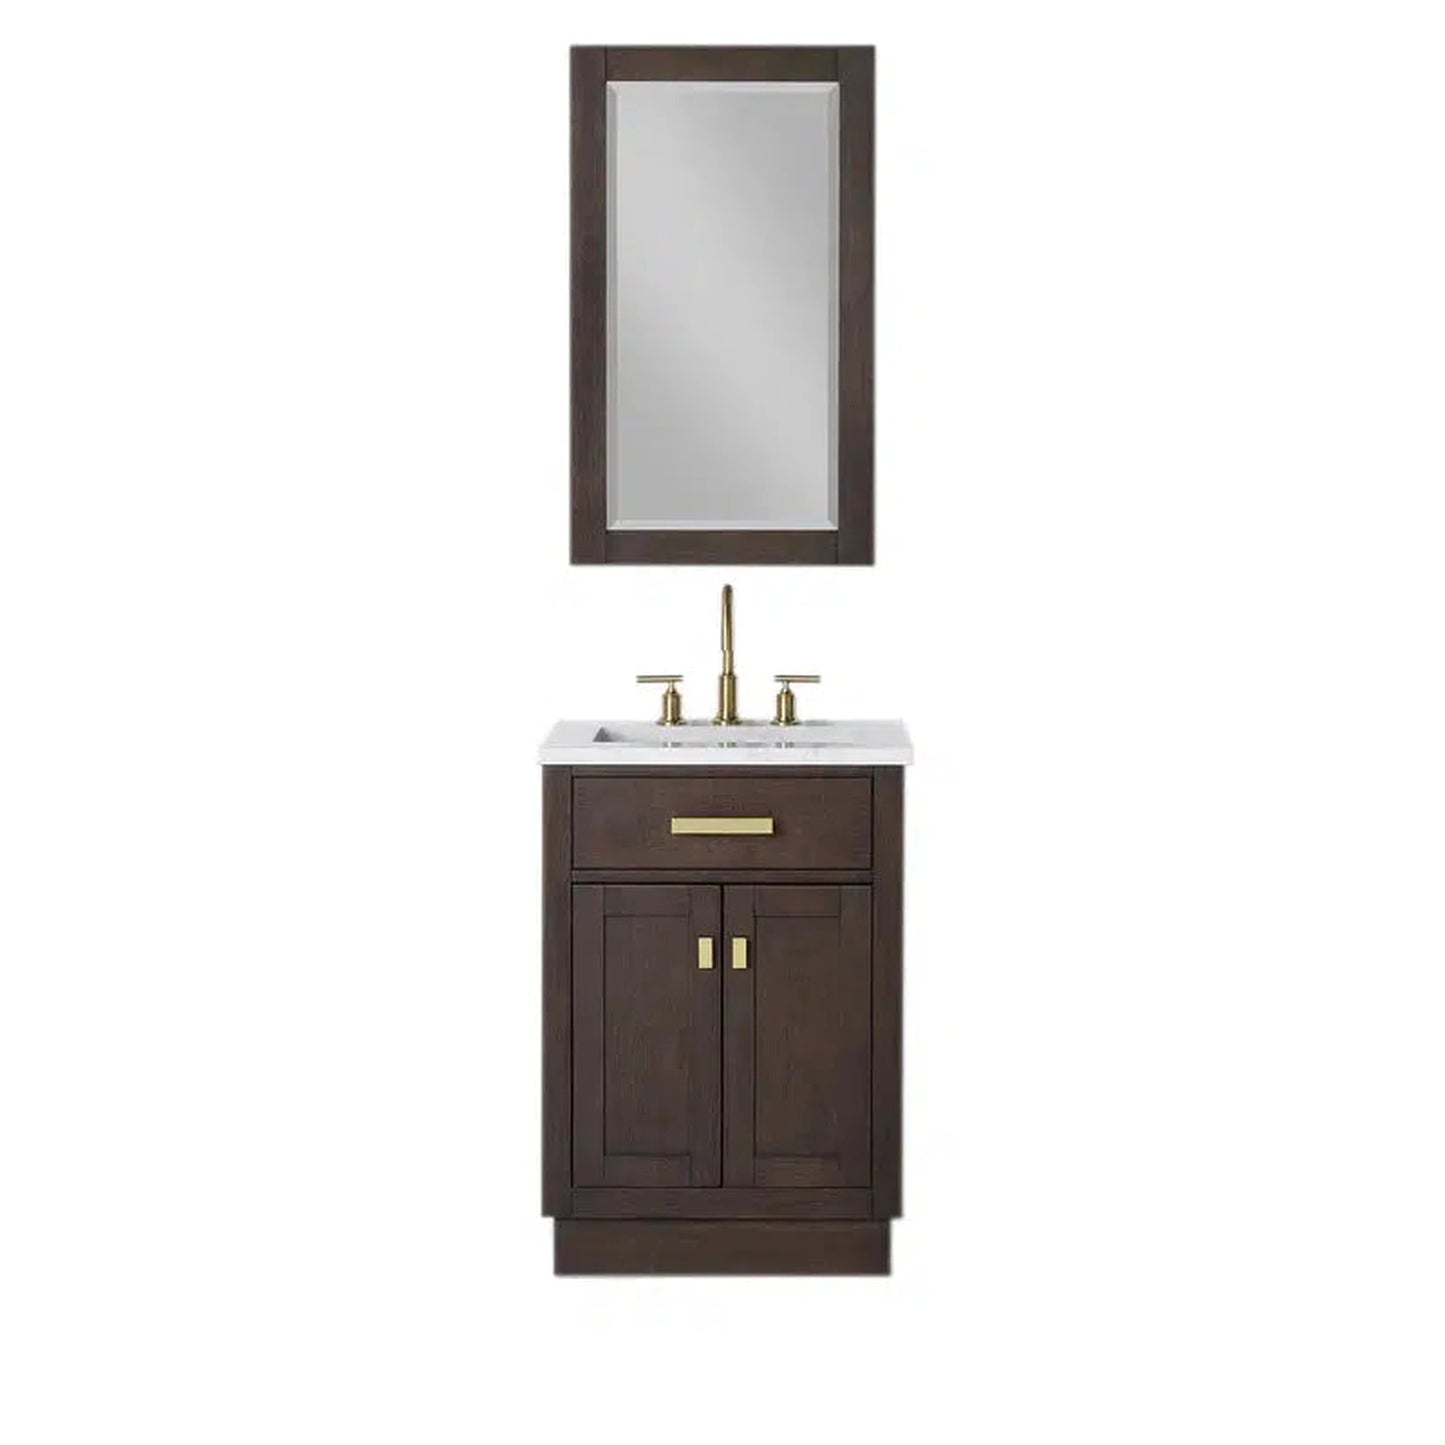 Water Creation Chestnut 24" Single Sink Carrara White Marble Countertop Vanity In Brown Oak with Grooseneck Faucet and Mirror